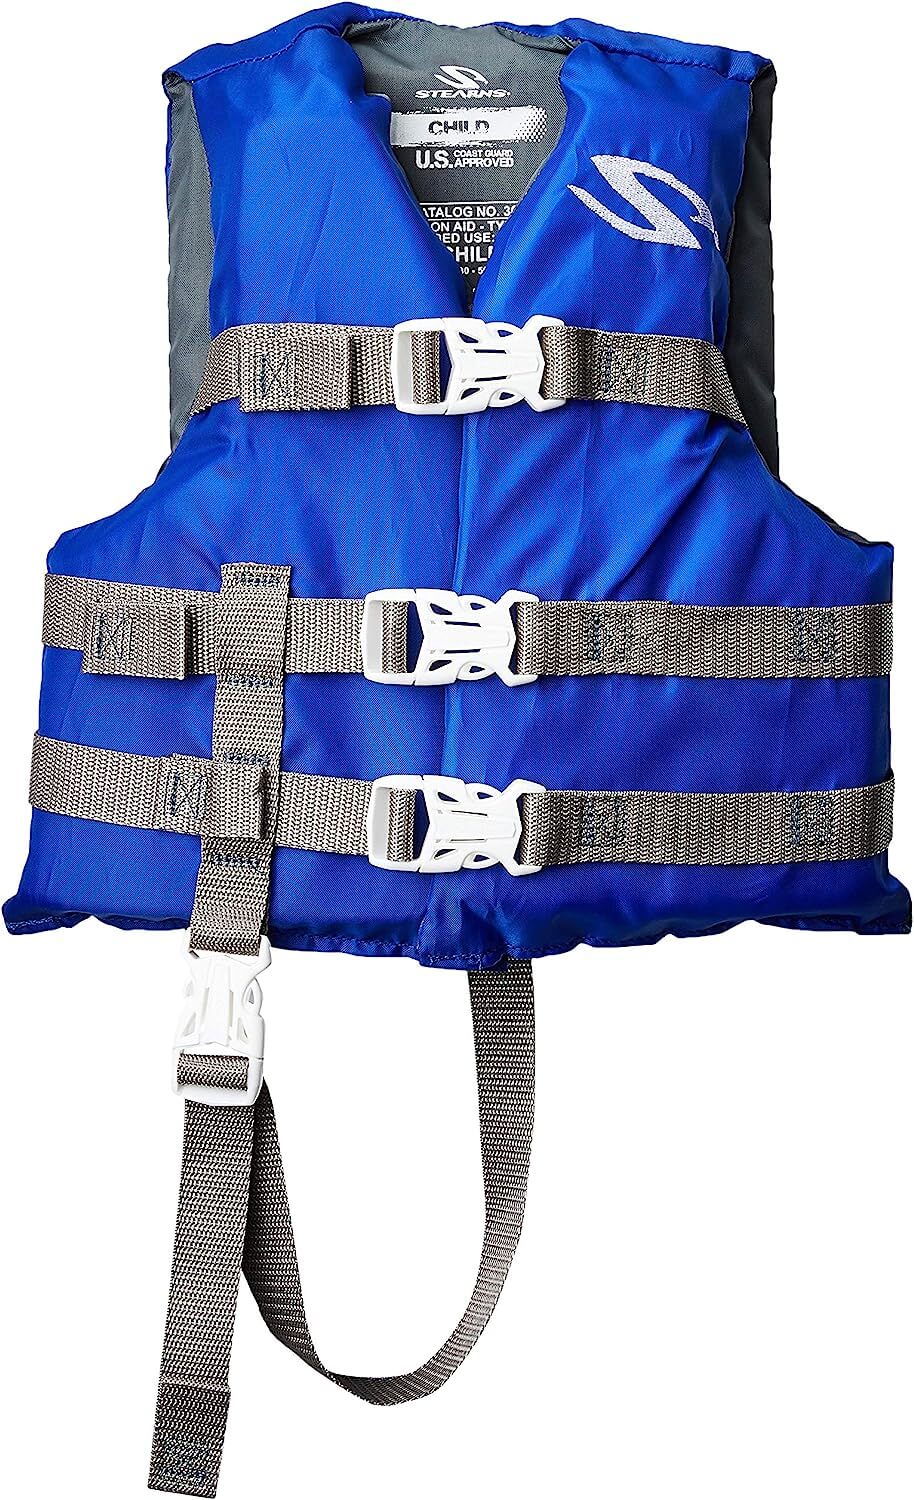 Stearns Child Classic Series Life Vest